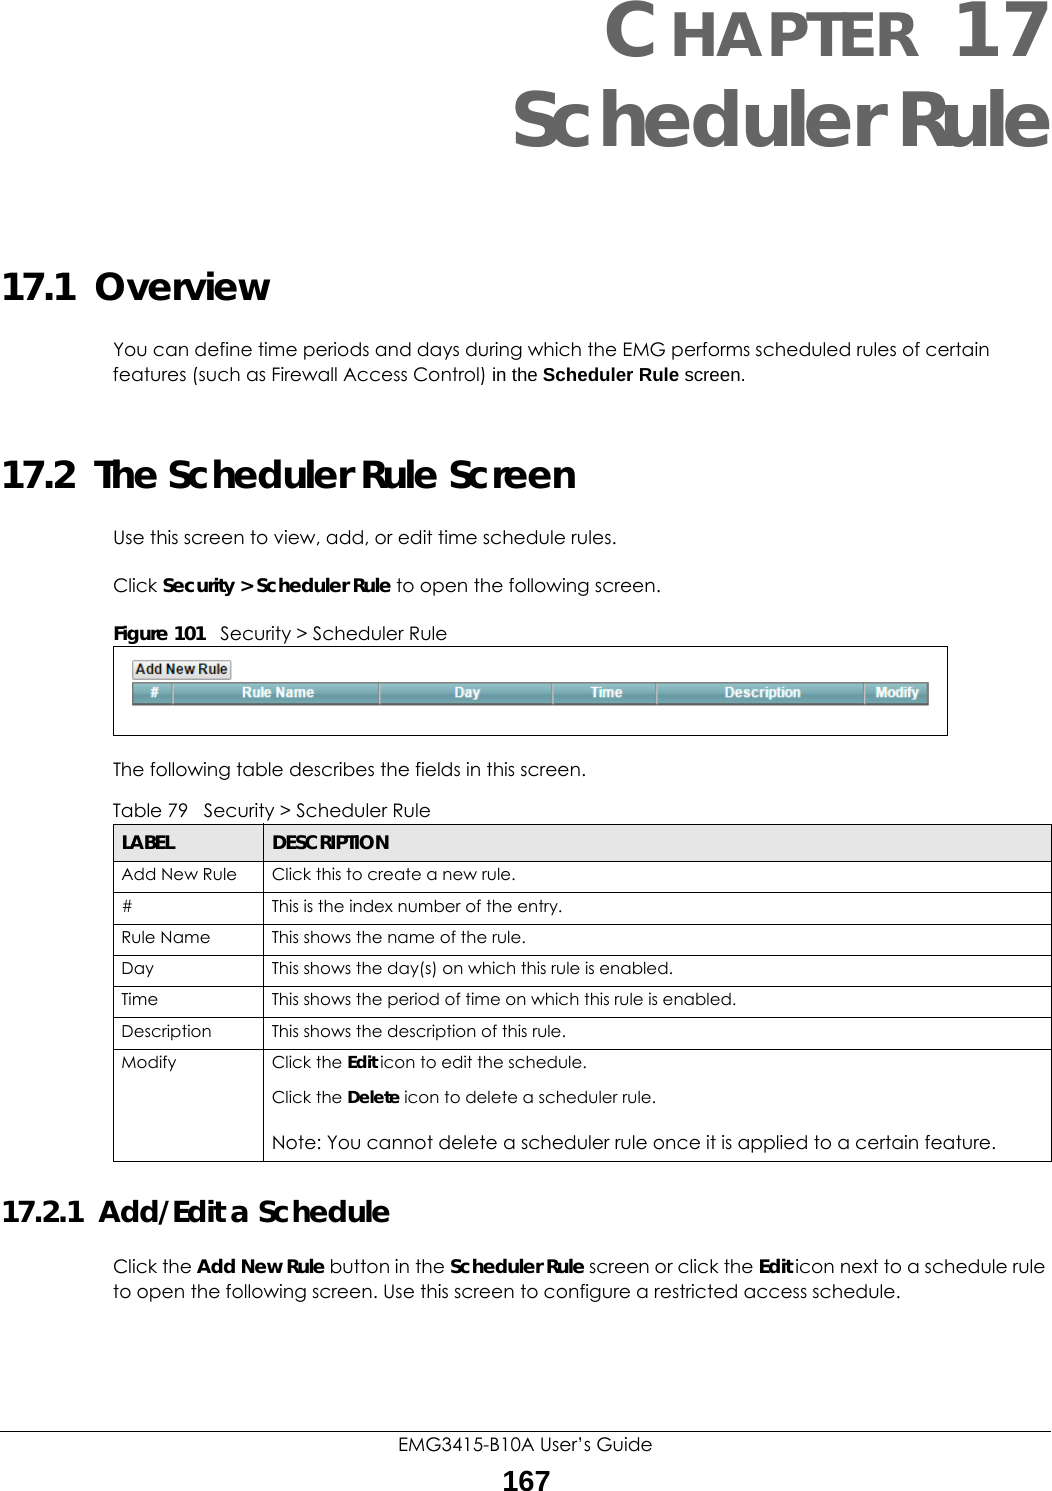 EMG3415-B10A User’s Guide167CHAPTER 17Scheduler Rule17.1  OverviewYou can define time periods and days during which the EMG performs scheduled rules of certain features (such as Firewall Access Control) in the Scheduler Rule screen. 17.2  The Scheduler Rule ScreenUse this screen to view, add, or edit time schedule rules.Click Security &gt; Scheduler Rule to open the following screen. Figure 101   Security &gt; Scheduler Rule The following table describes the fields in this screen. 17.2.1  Add/Edit a ScheduleClick the Add New Rule button in the Scheduler Rule screen or click the Edit icon next to a schedule rule to open the following screen. Use this screen to configure a restricted access schedule. Table 79   Security &gt; Scheduler RuleLABEL DESCRIPTIONAdd New Rule Click this to create a new rule.#This is the index number of the entry.Rule Name This shows the name of the rule.Day This shows the day(s) on which this rule is enabled.Time This shows the period of time on which this rule is enabled.Description This shows the description of this rule.Modify Click the Edit icon to edit the schedule.Click the Delete icon to delete a scheduler rule.Note: You cannot delete a scheduler rule once it is applied to a certain feature.